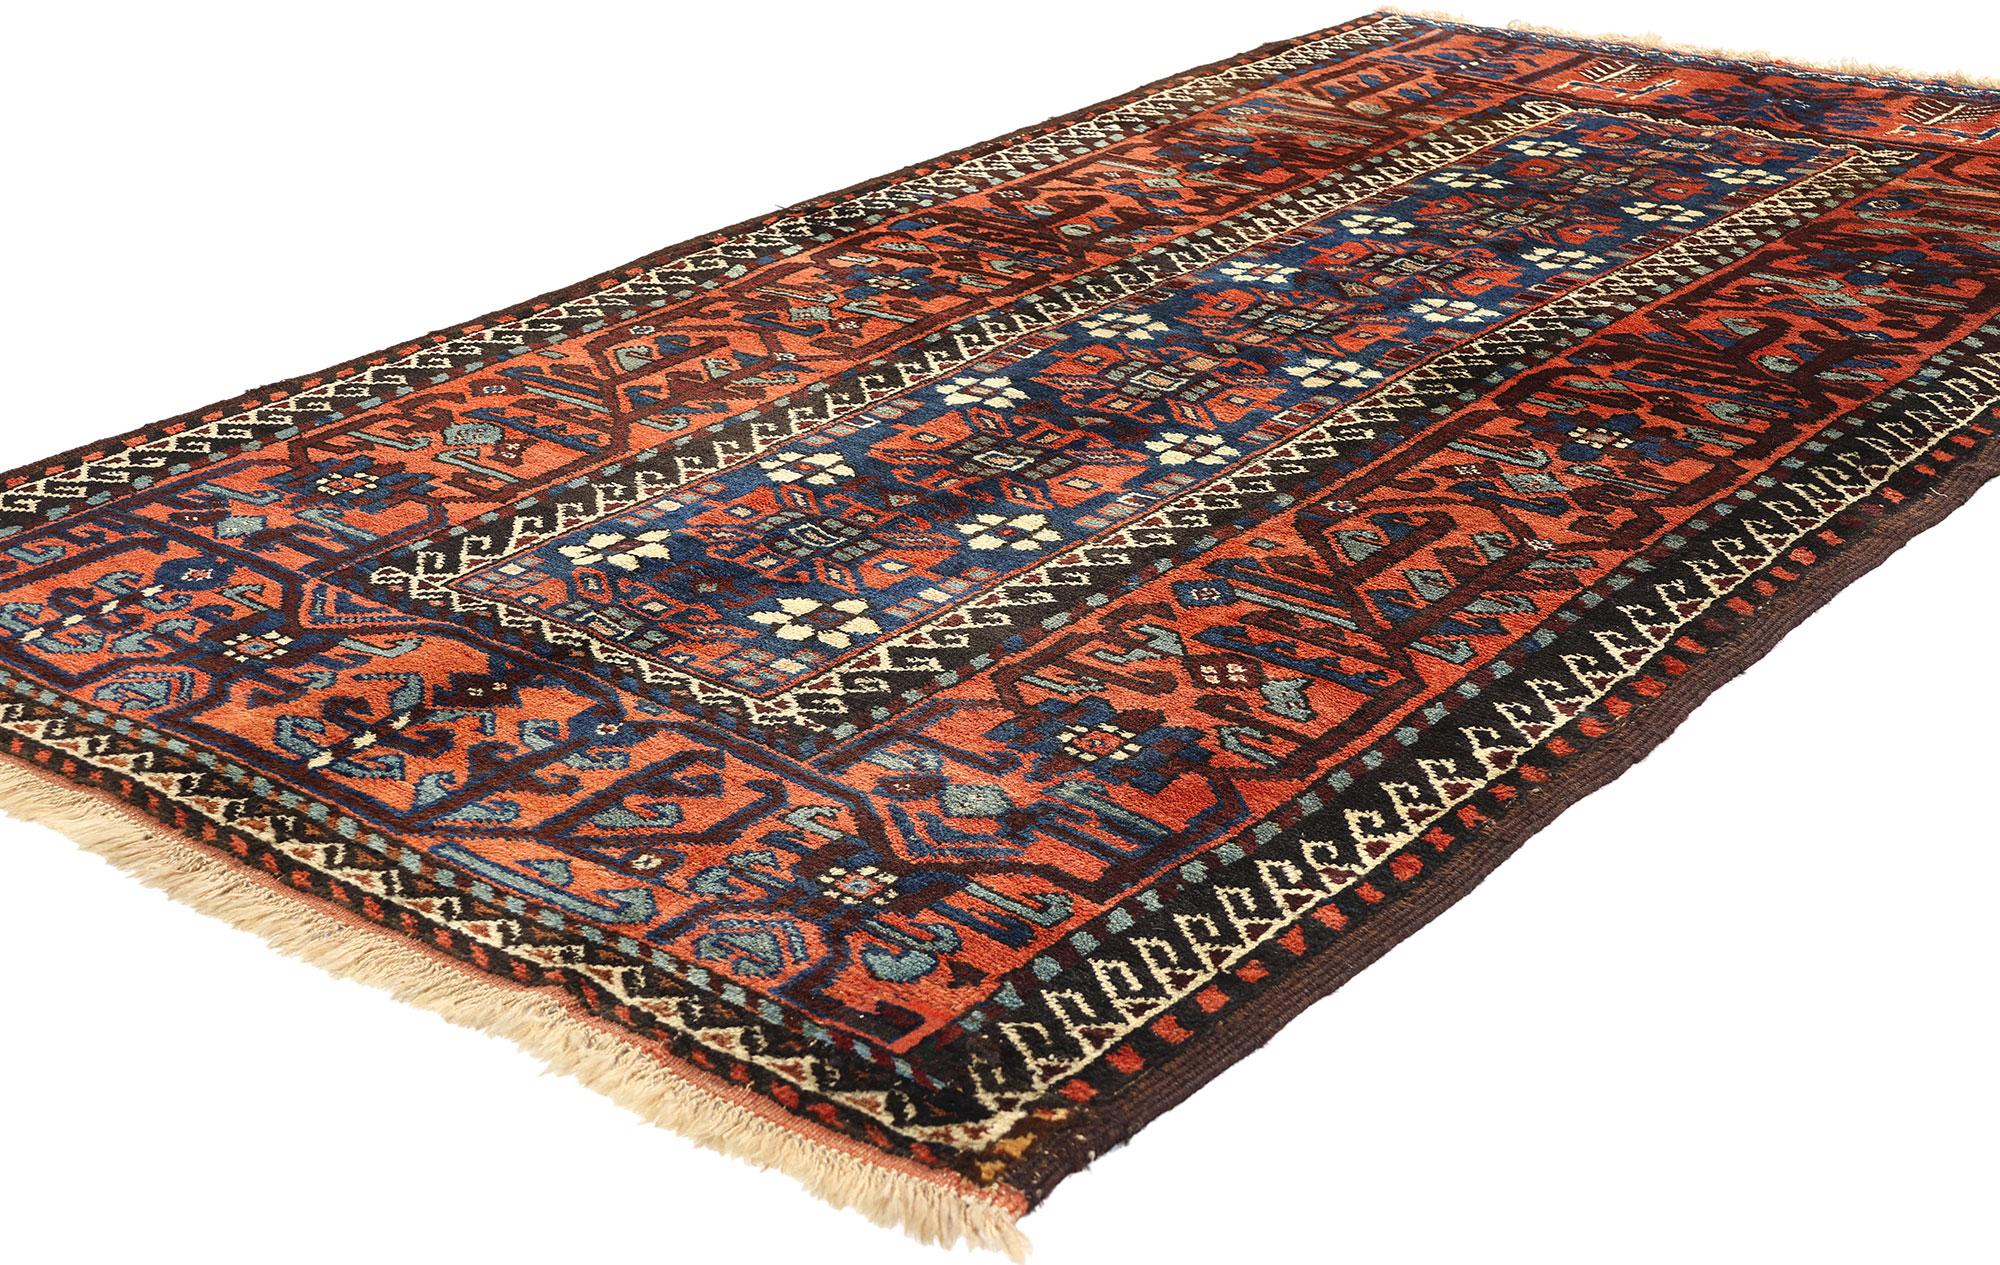 60924 Antique Caucasian Azerbaijan Rug, 04'03 x 07'11. Caucasian Azerbaijan rugs are a type of rug originating from the region of Azerbaijan in the Caucasus. These rugs are known for their intricate designs, rich colors, and high quality